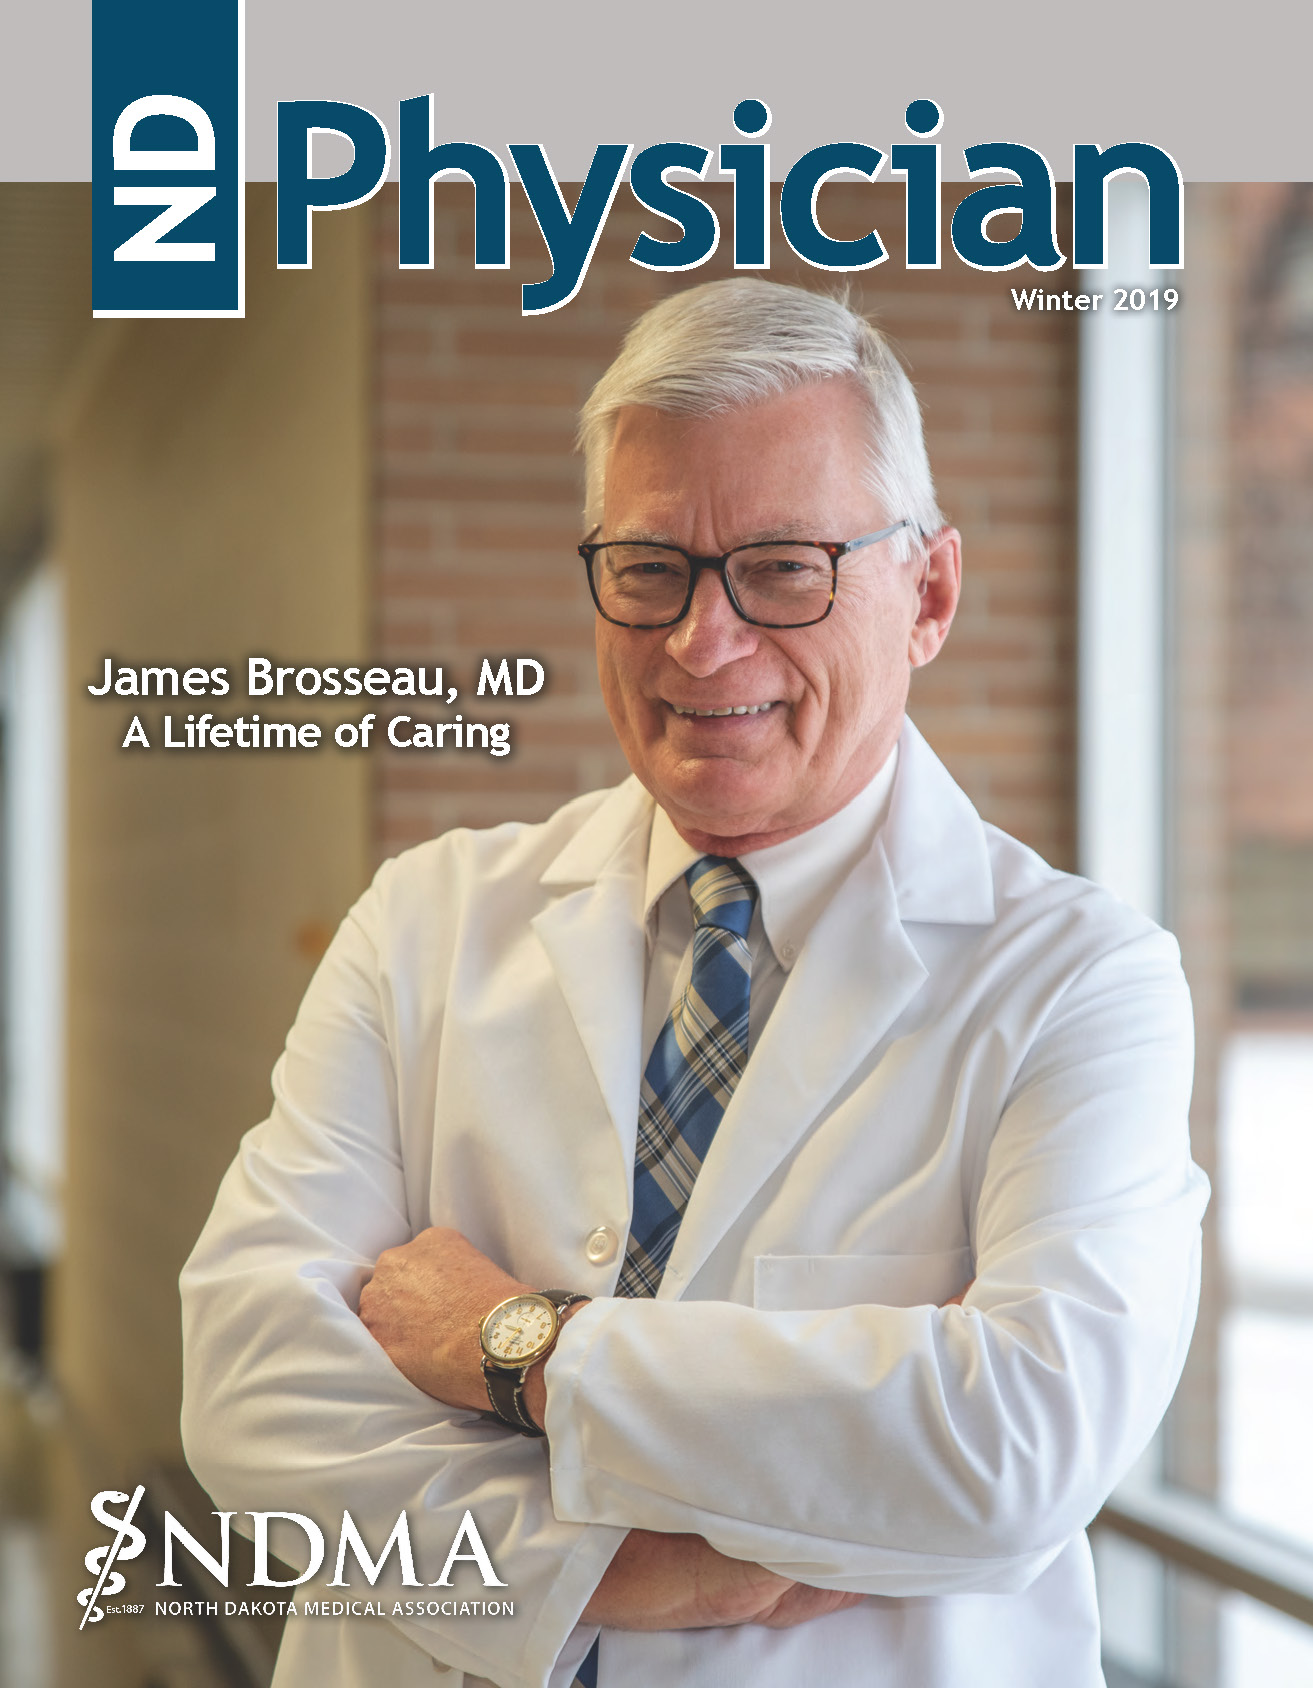 ND Physician Winter 2019 magazine cover